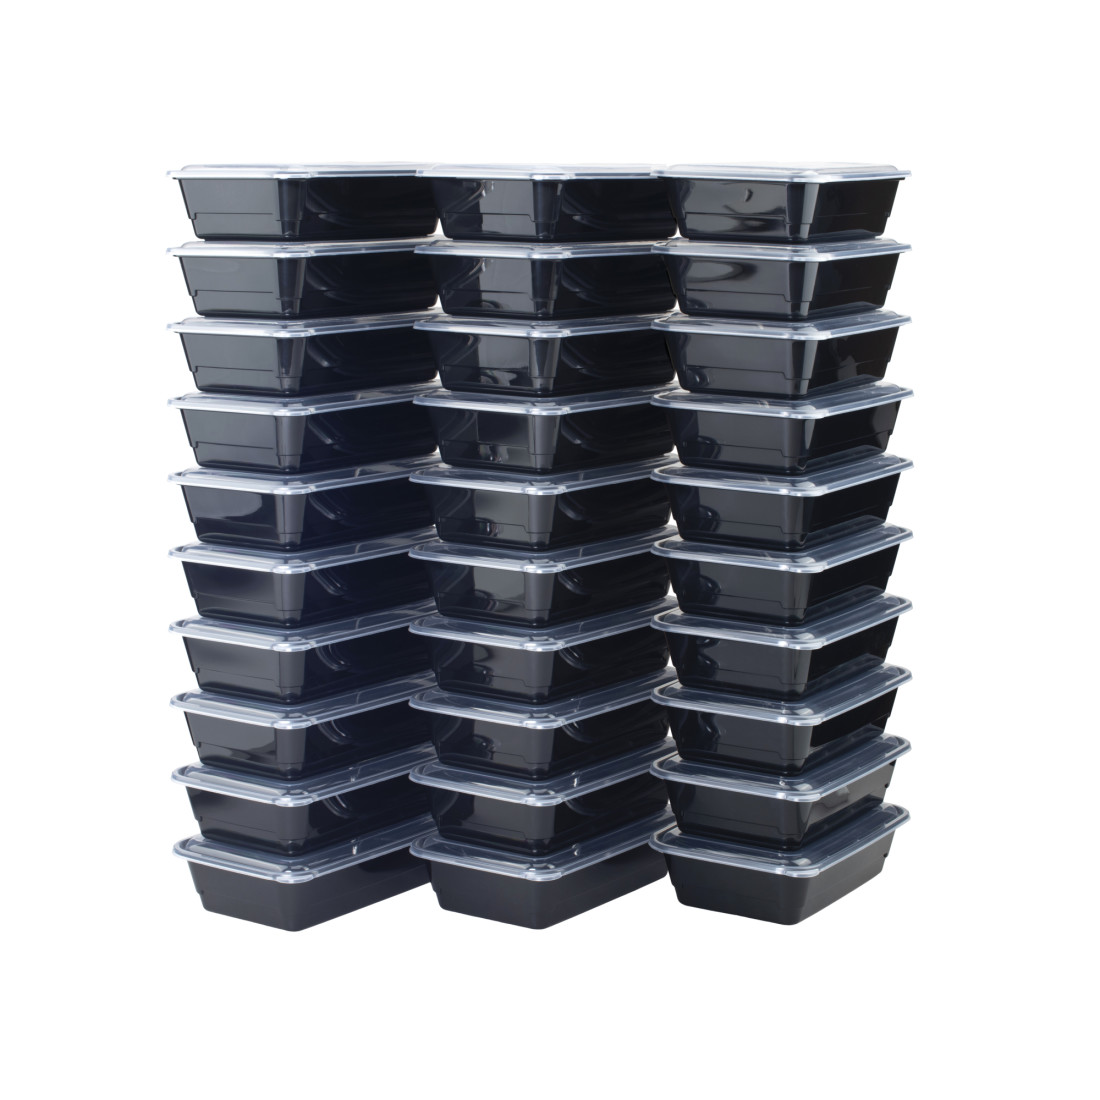 GoodCook® Meal Prep Two-Compartment Food Storage Containers